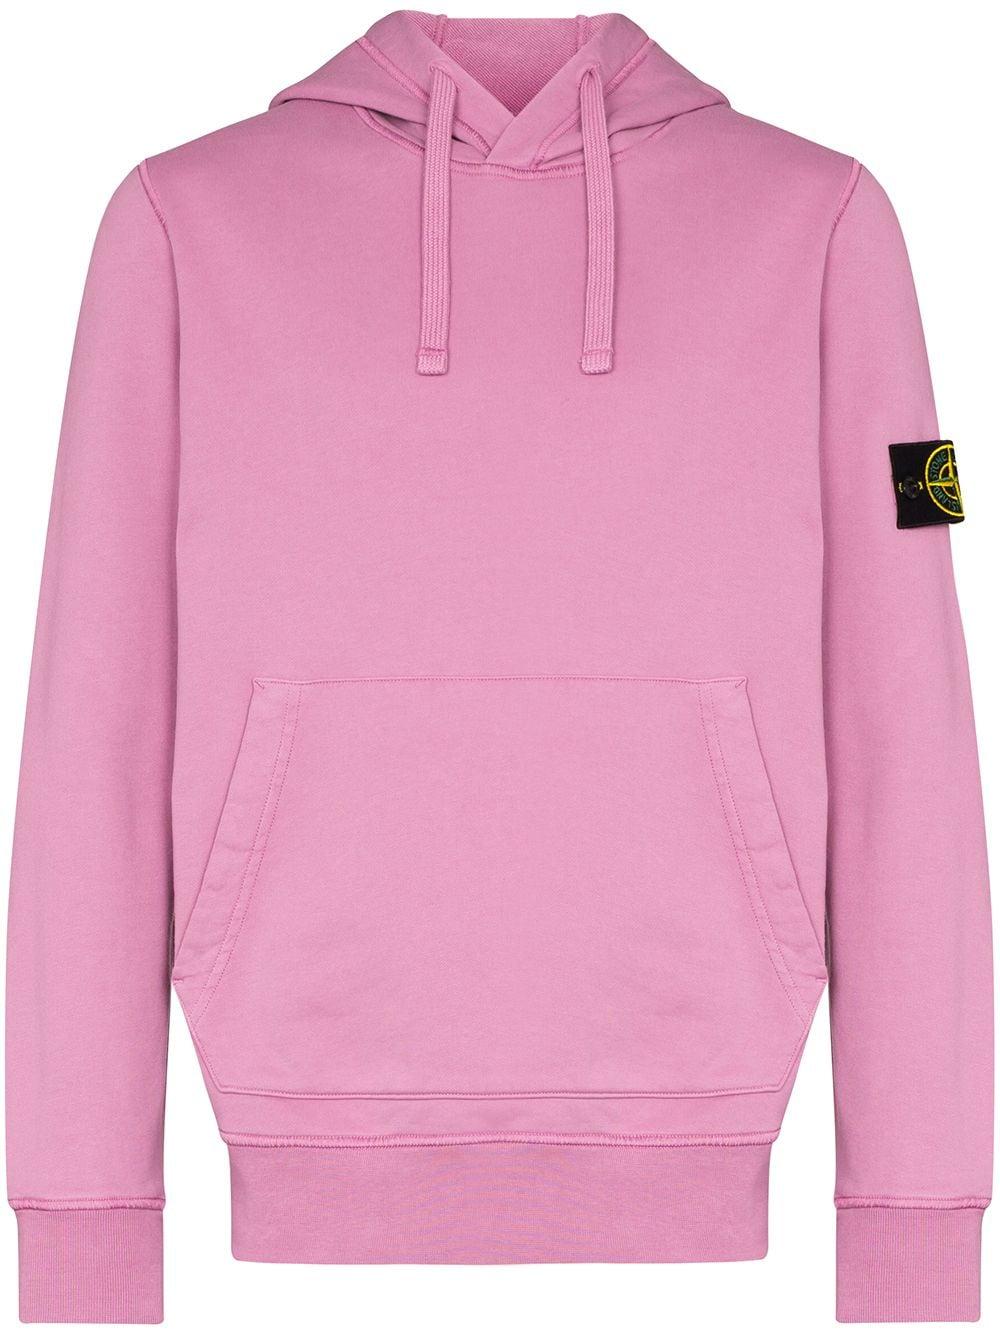 Stone Island Cotton Hoodie in Pink for Men | Lyst